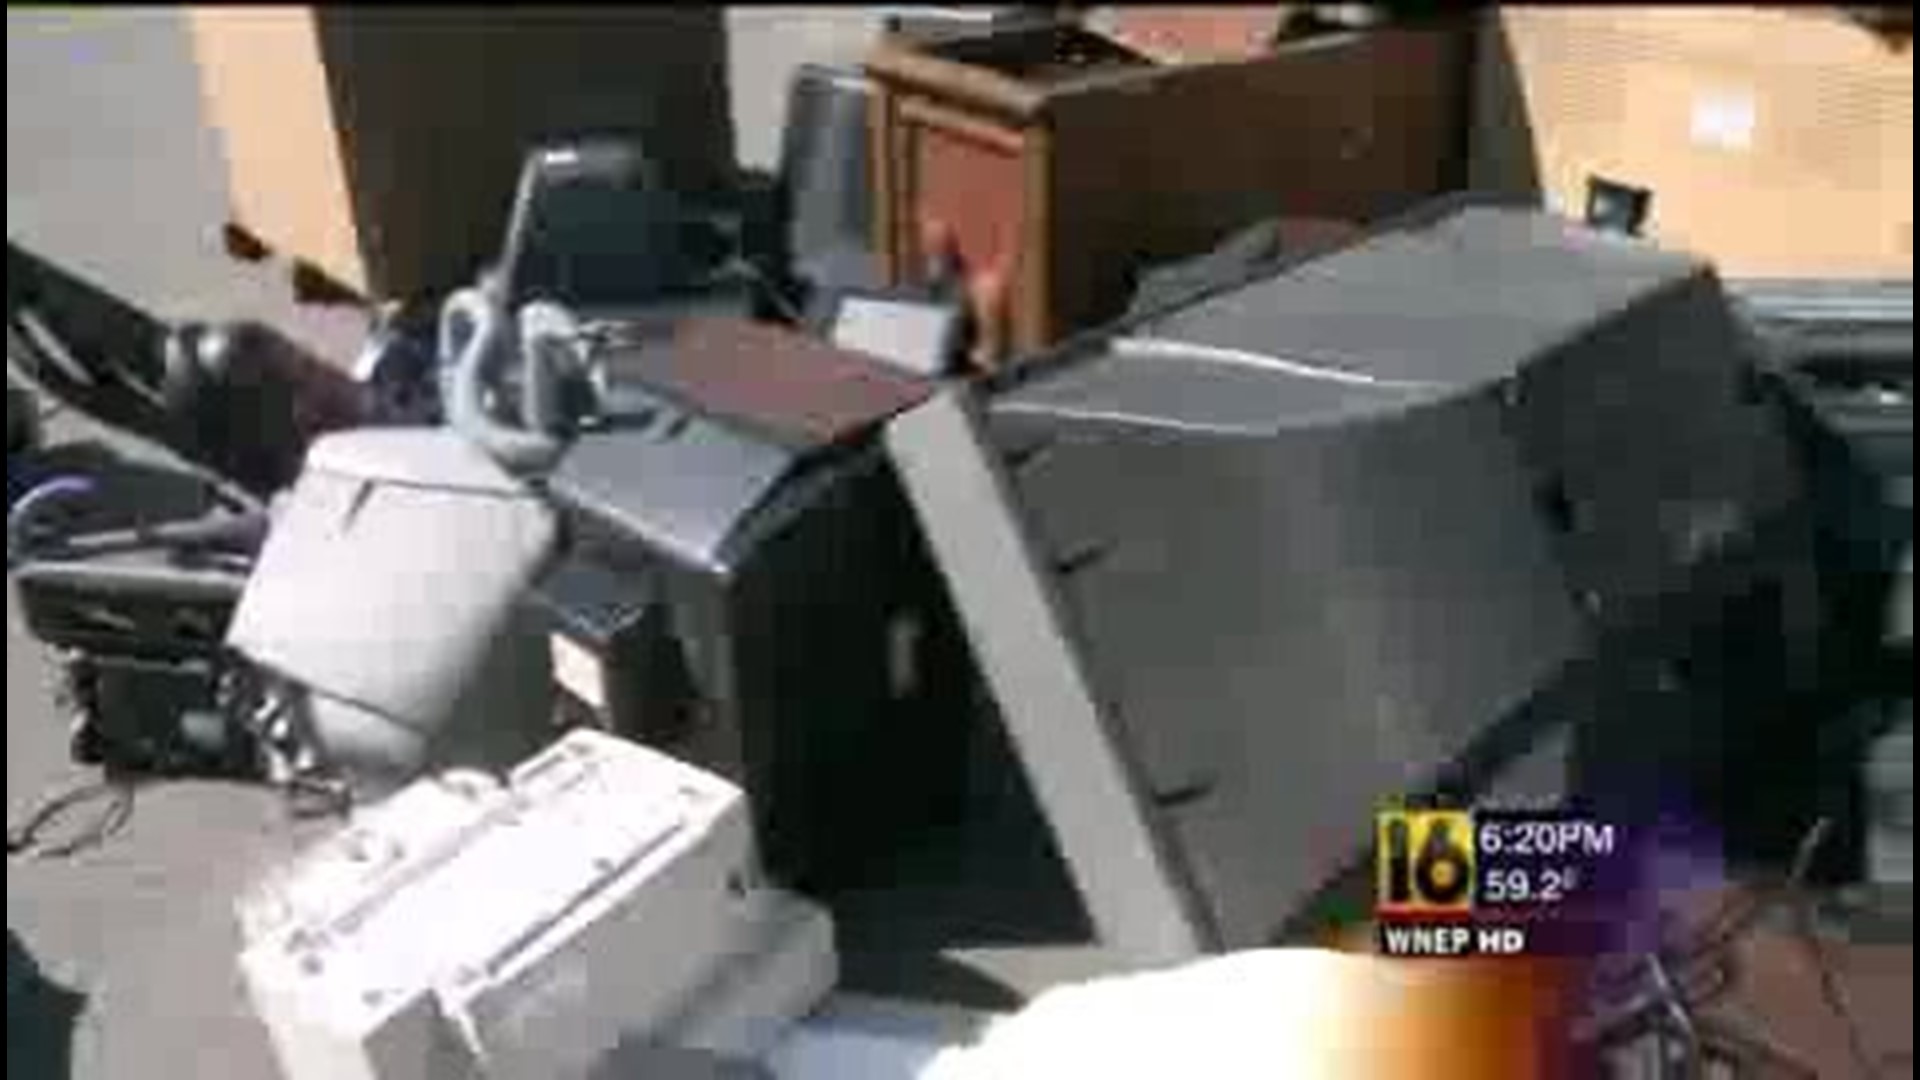 Getting Rid of E-Waste 10-6-11